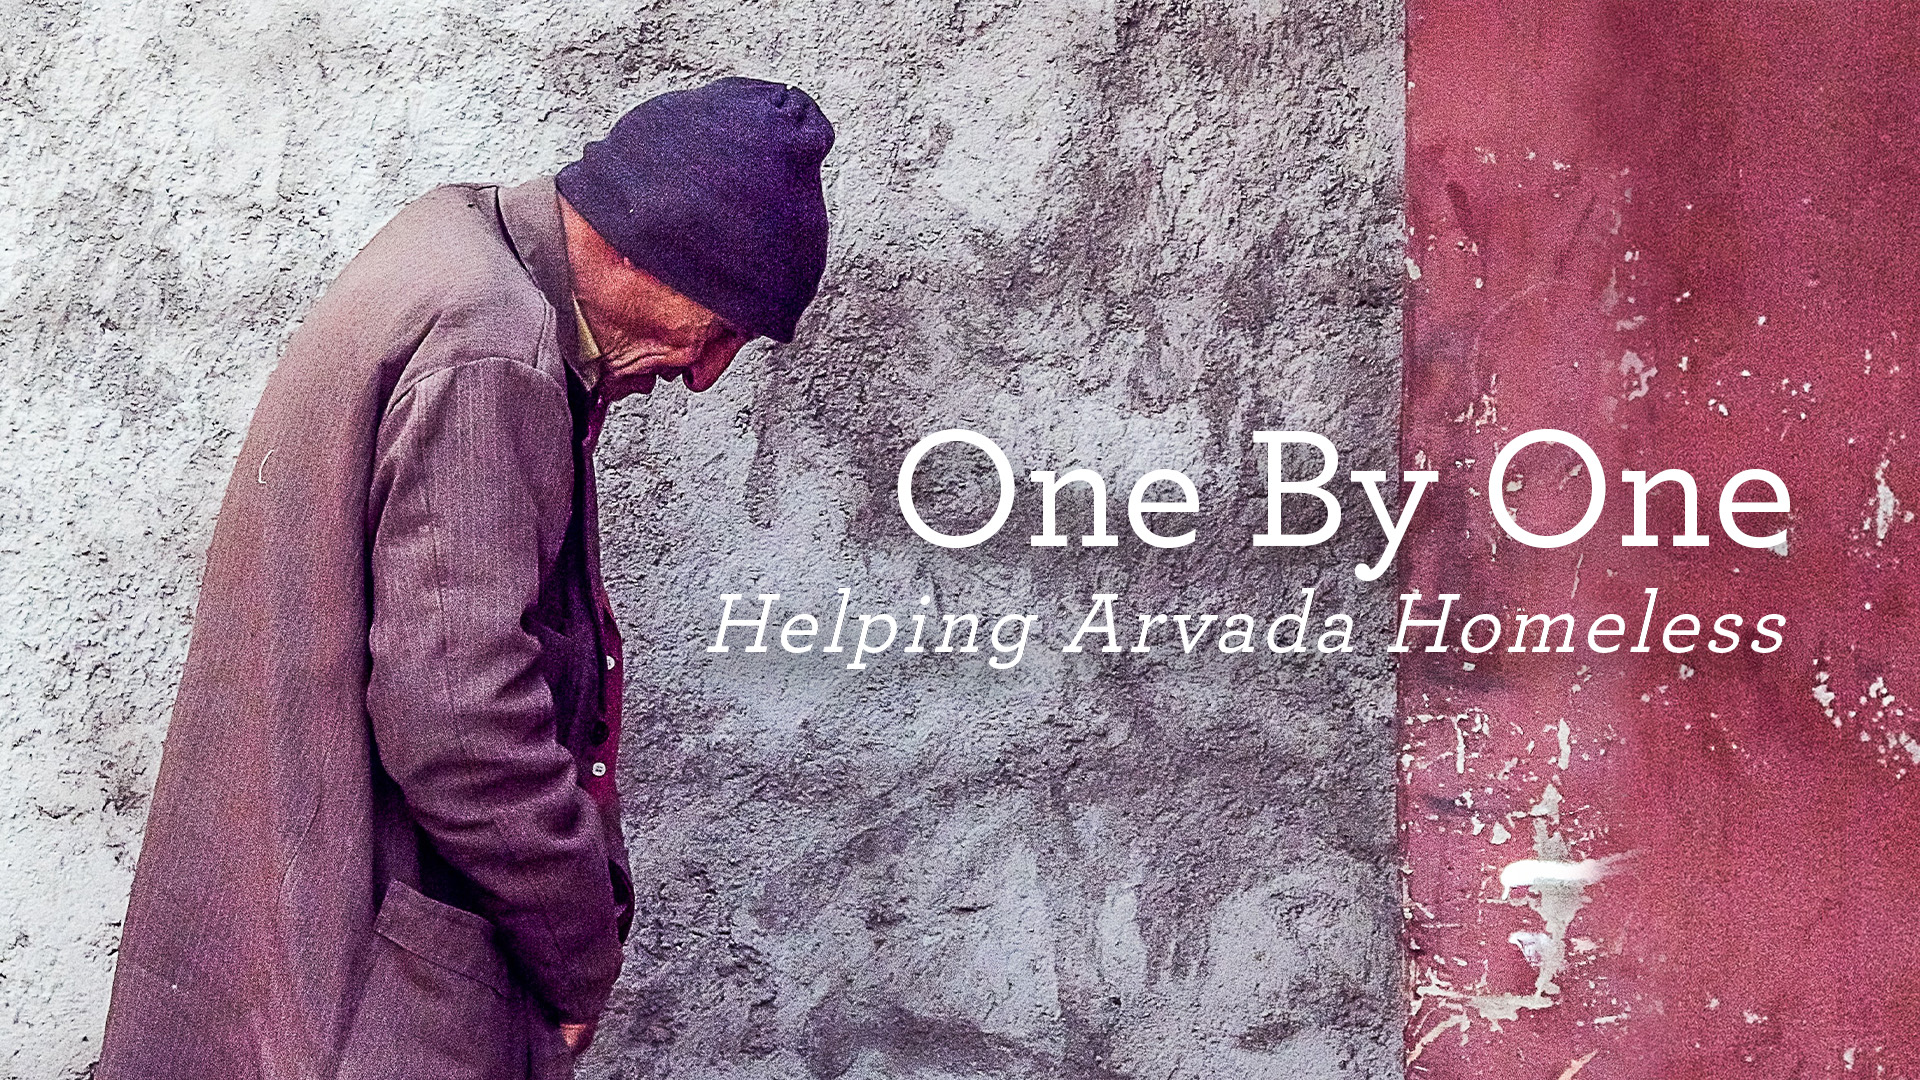 One By One Helping Arvada Homeless
